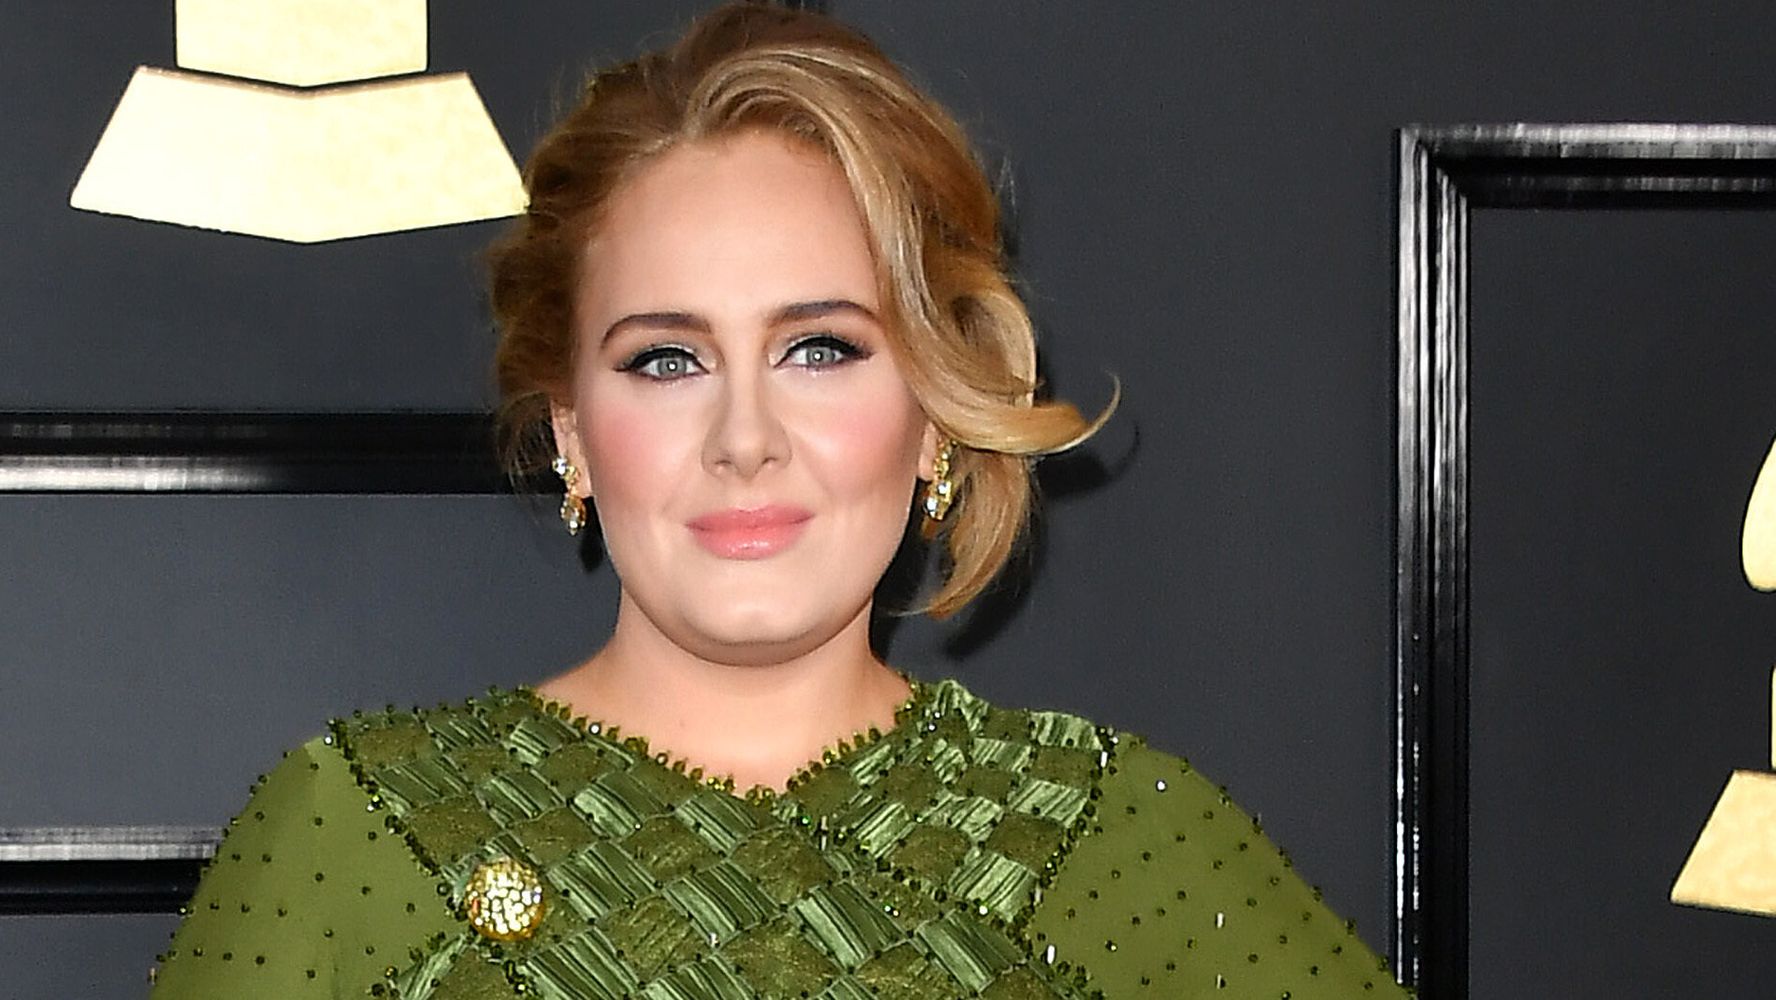 Adele To Host ‘Saturday Night Live’ For First Time: ‘Bloooooody Hellllll’